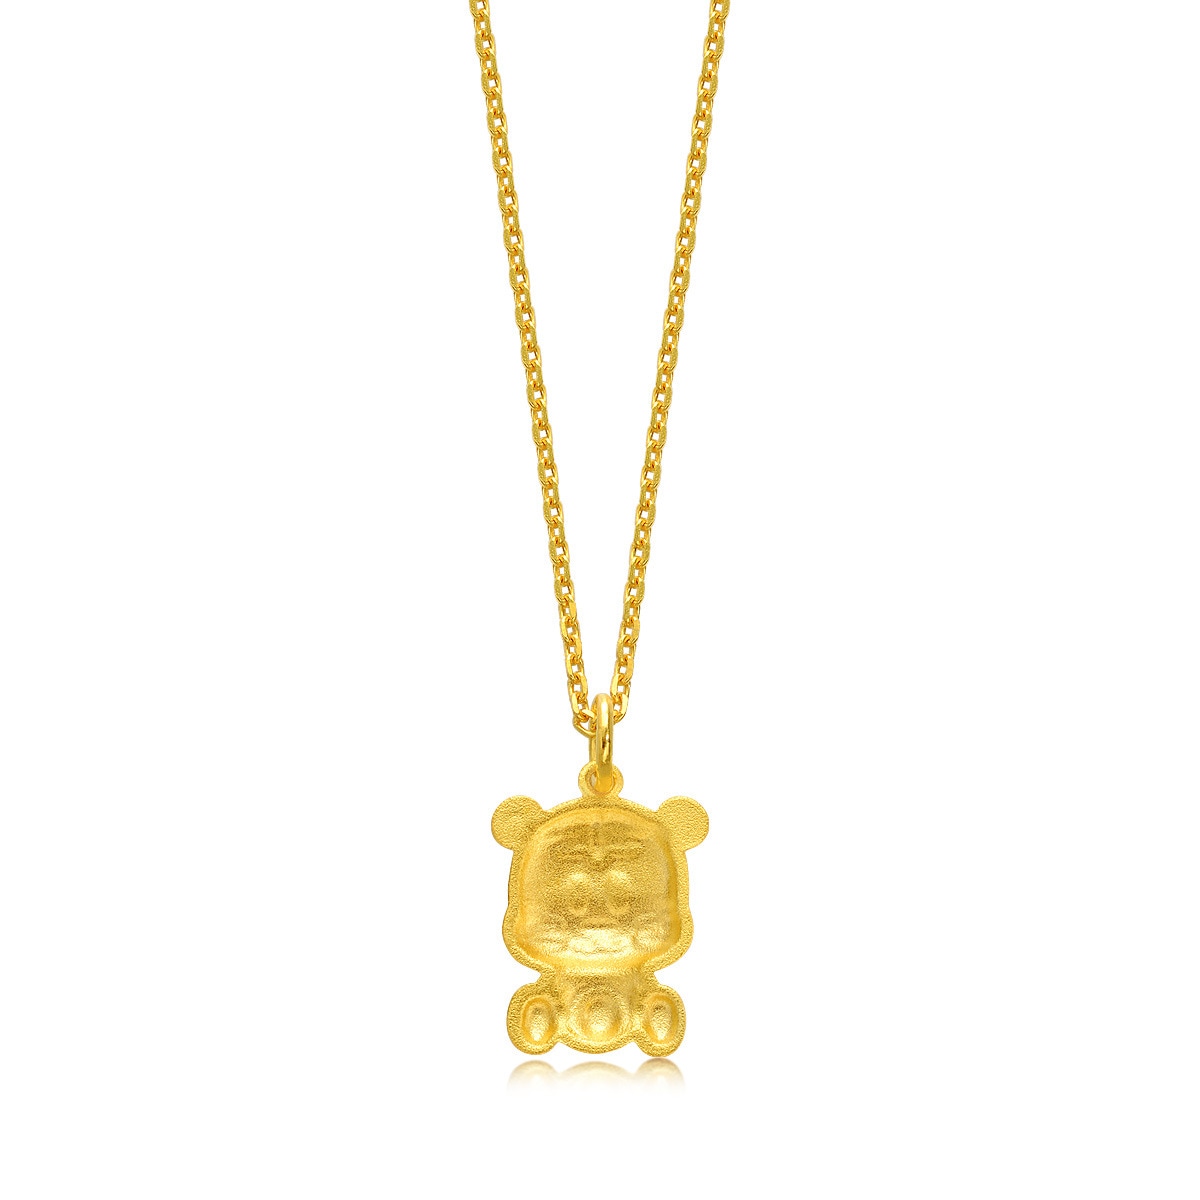 Chinese Gifting Collection 999.9 Gold Pendant - 86477P | Chow Sang Sang ...